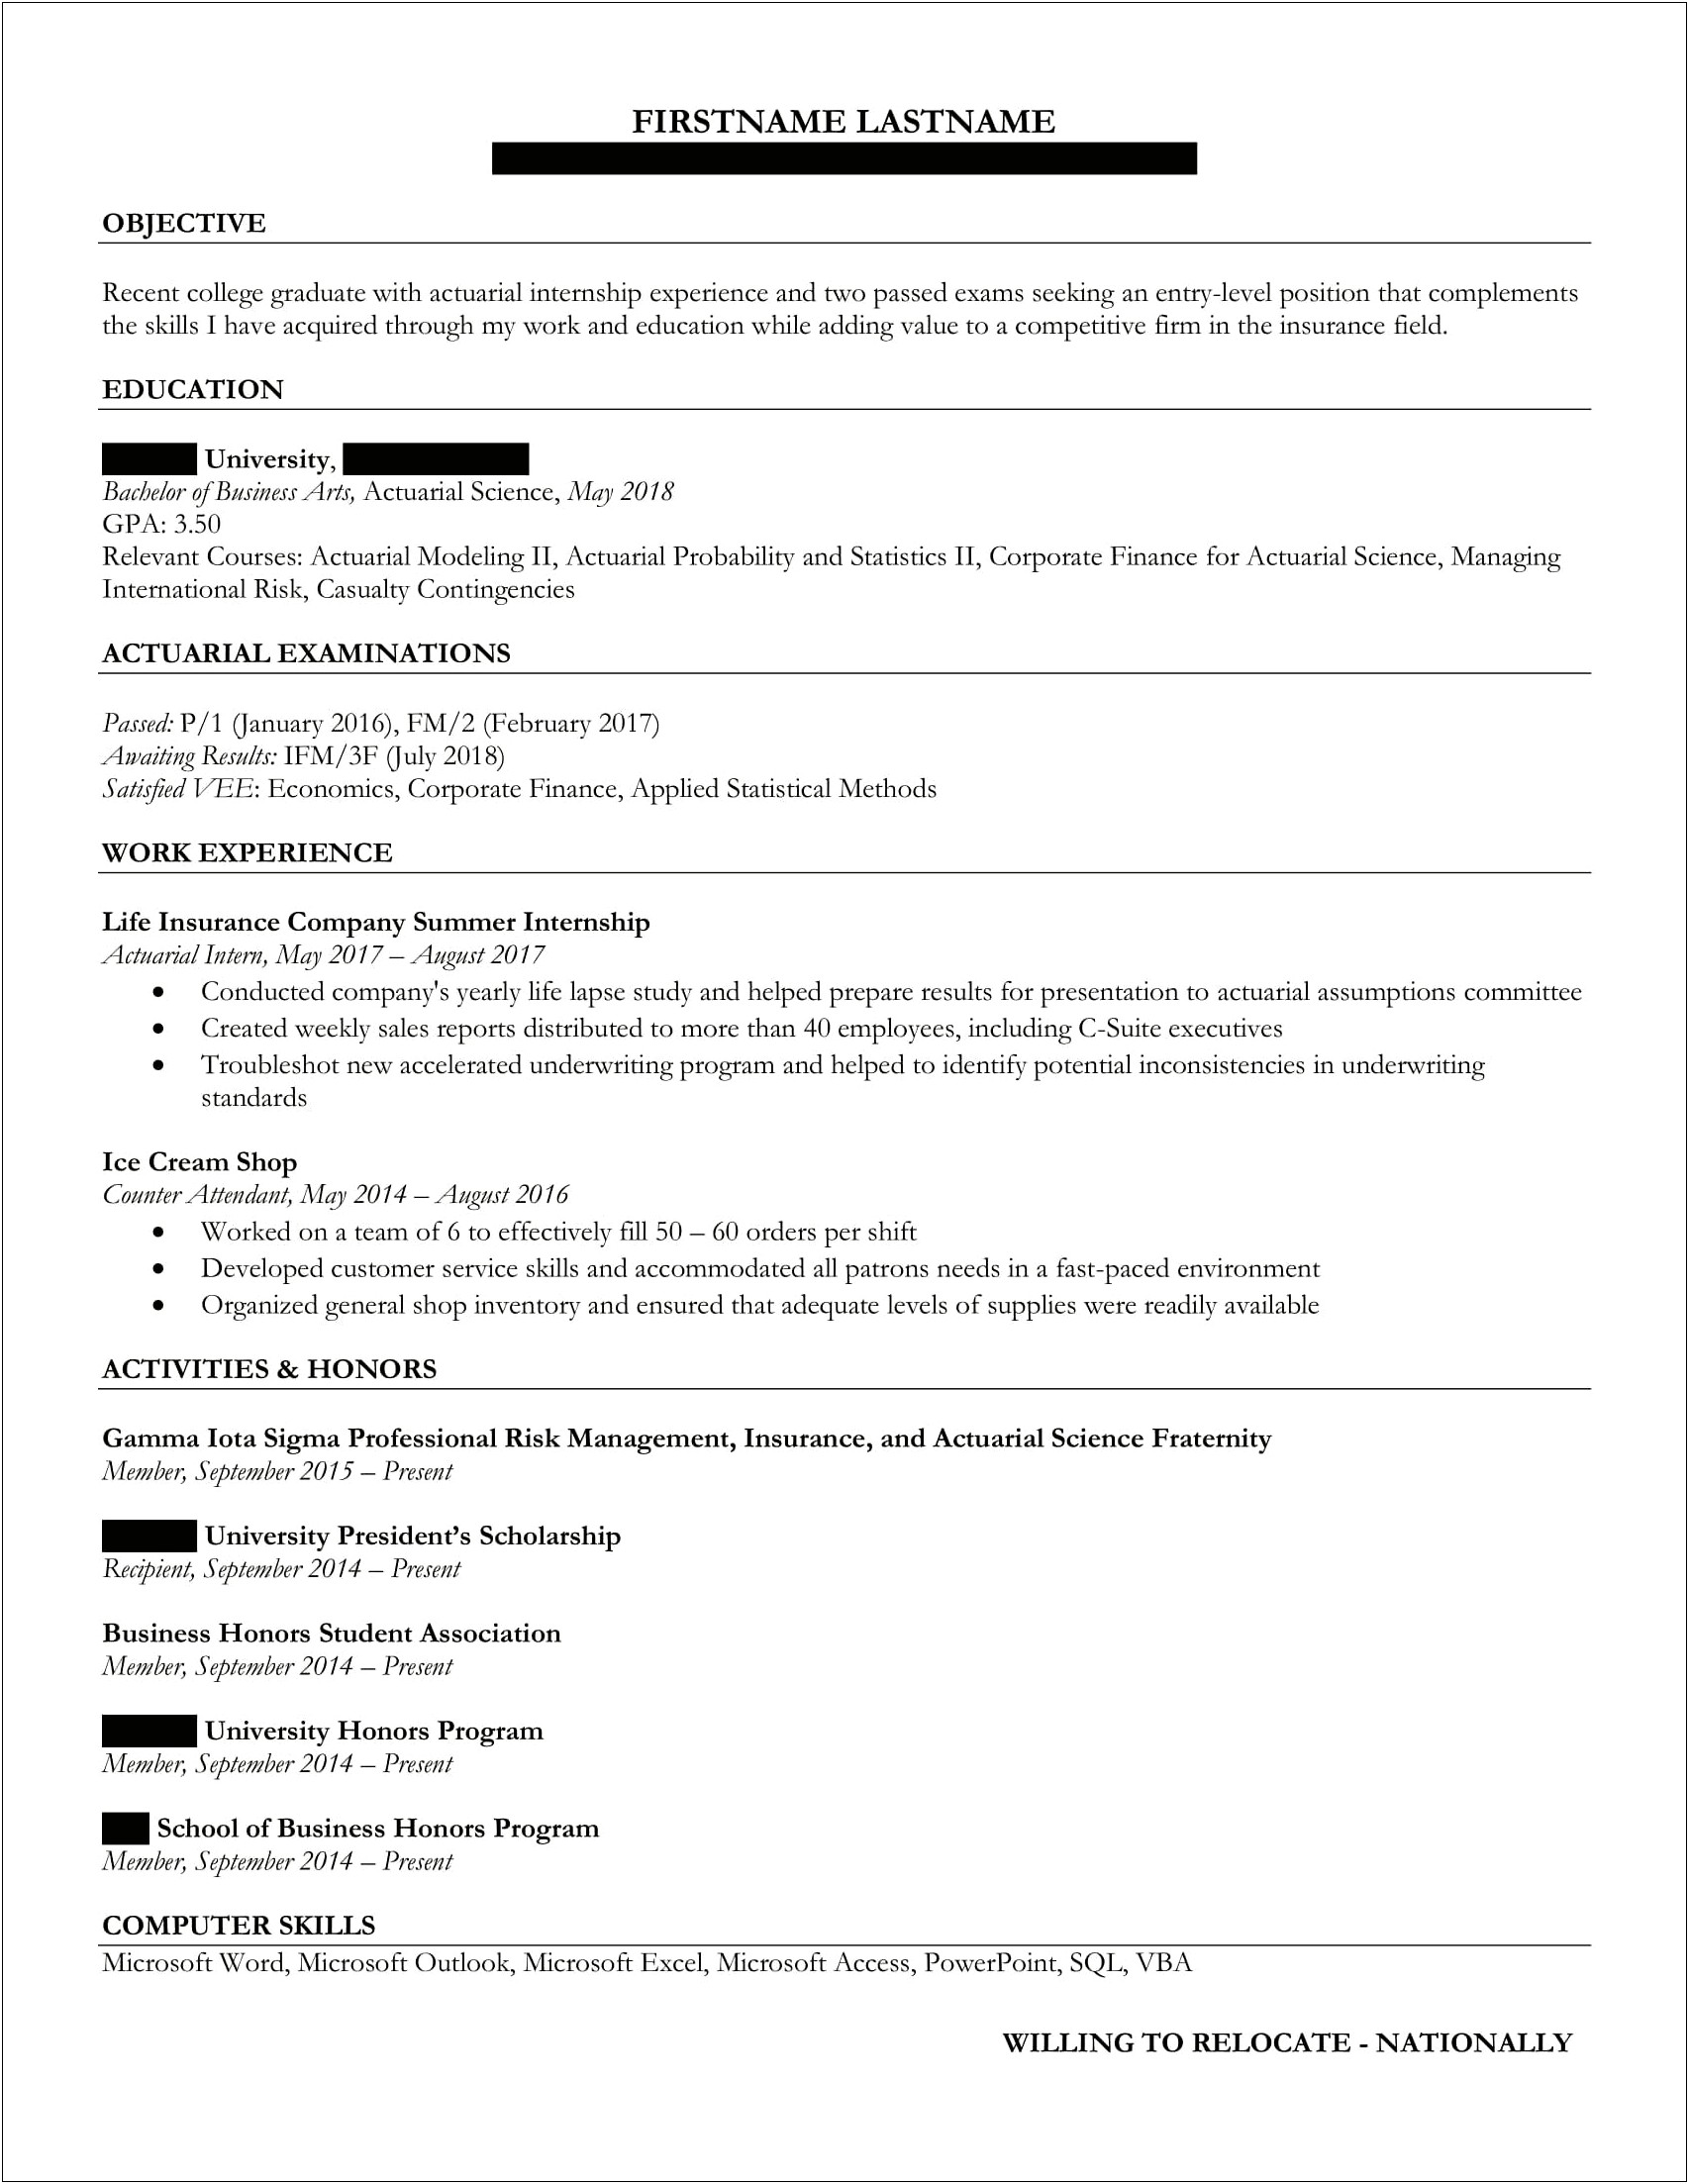 Sample Resumes For Actuarial Entry Level